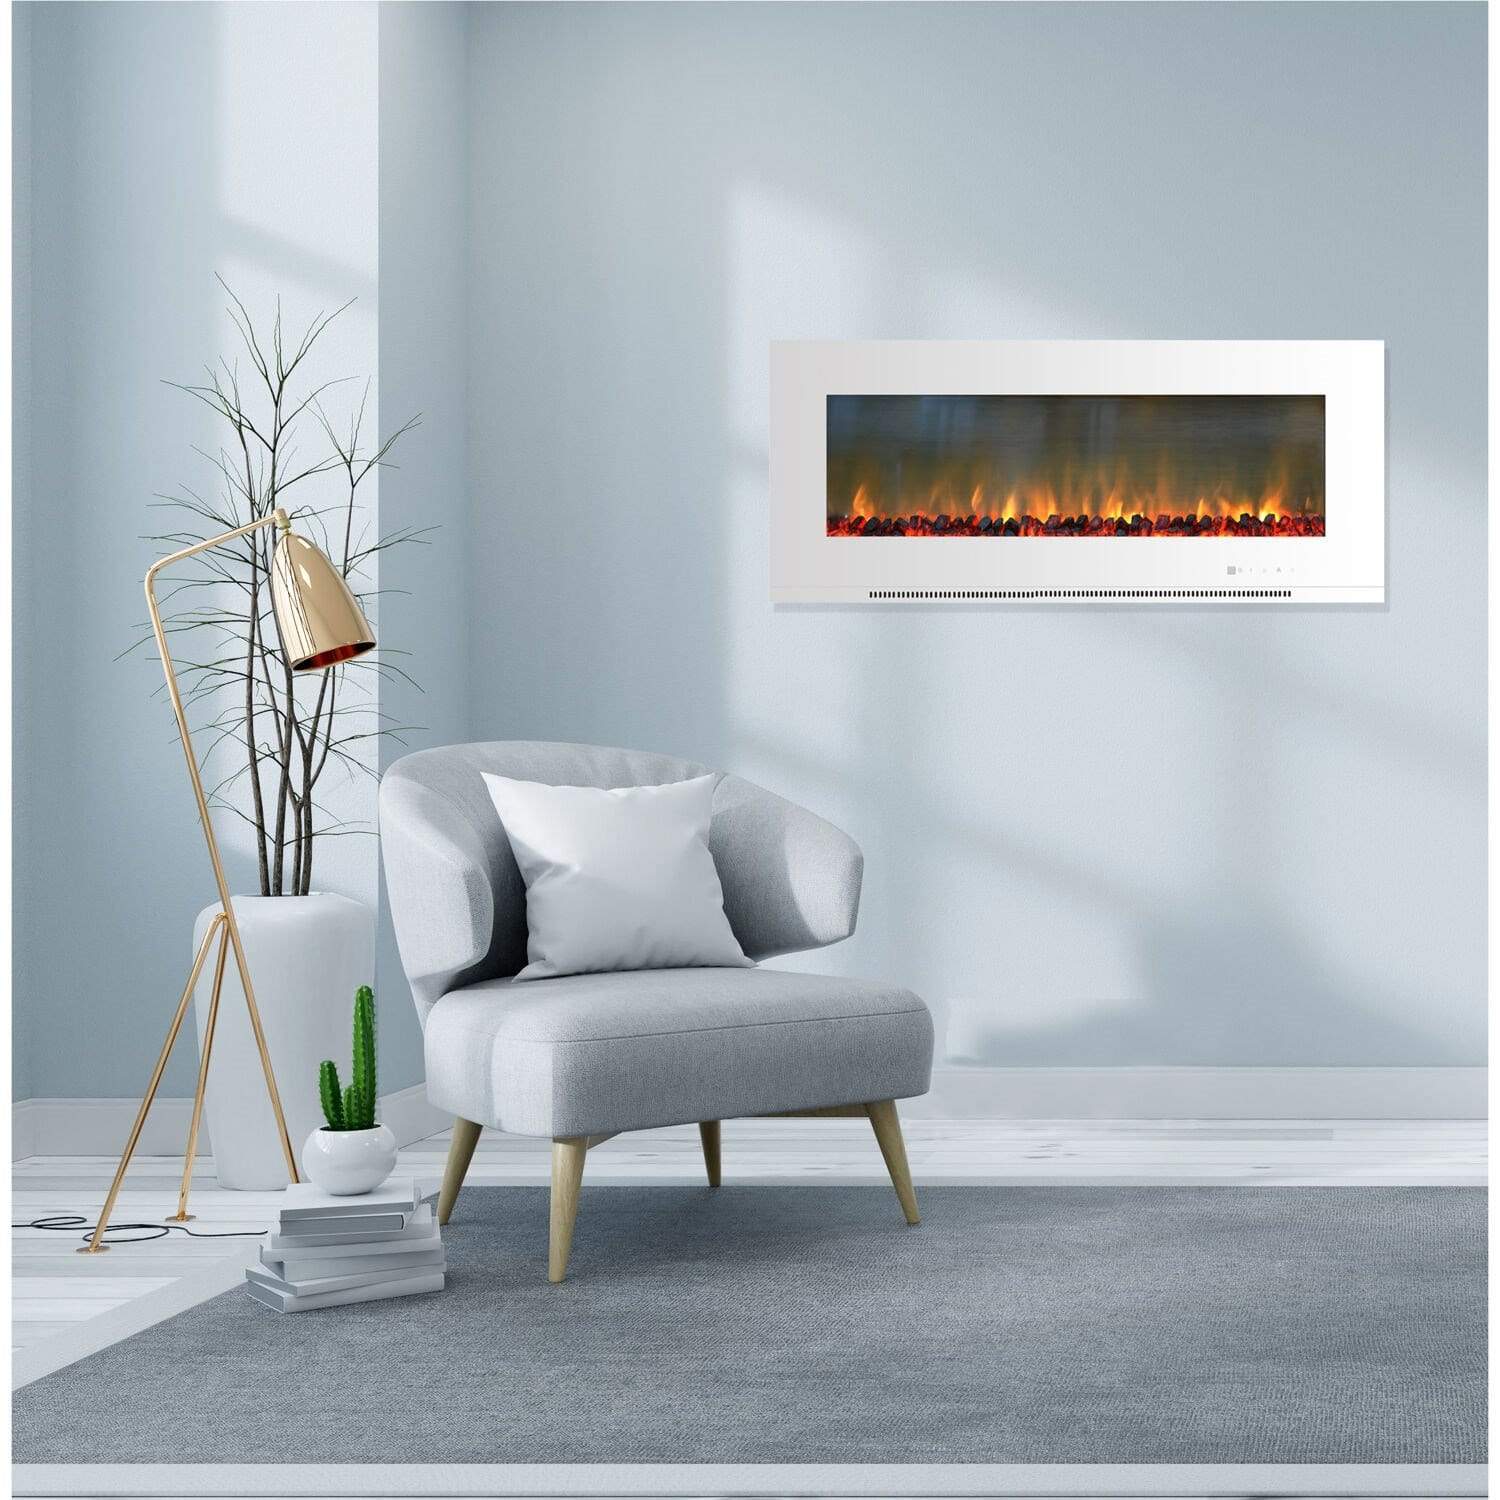 Cambridge Electric Wall-hung Fireplaces Cambridge 56-In. Metropolitan Wall-Mount Electric Fireplace in White with Burning Log Display